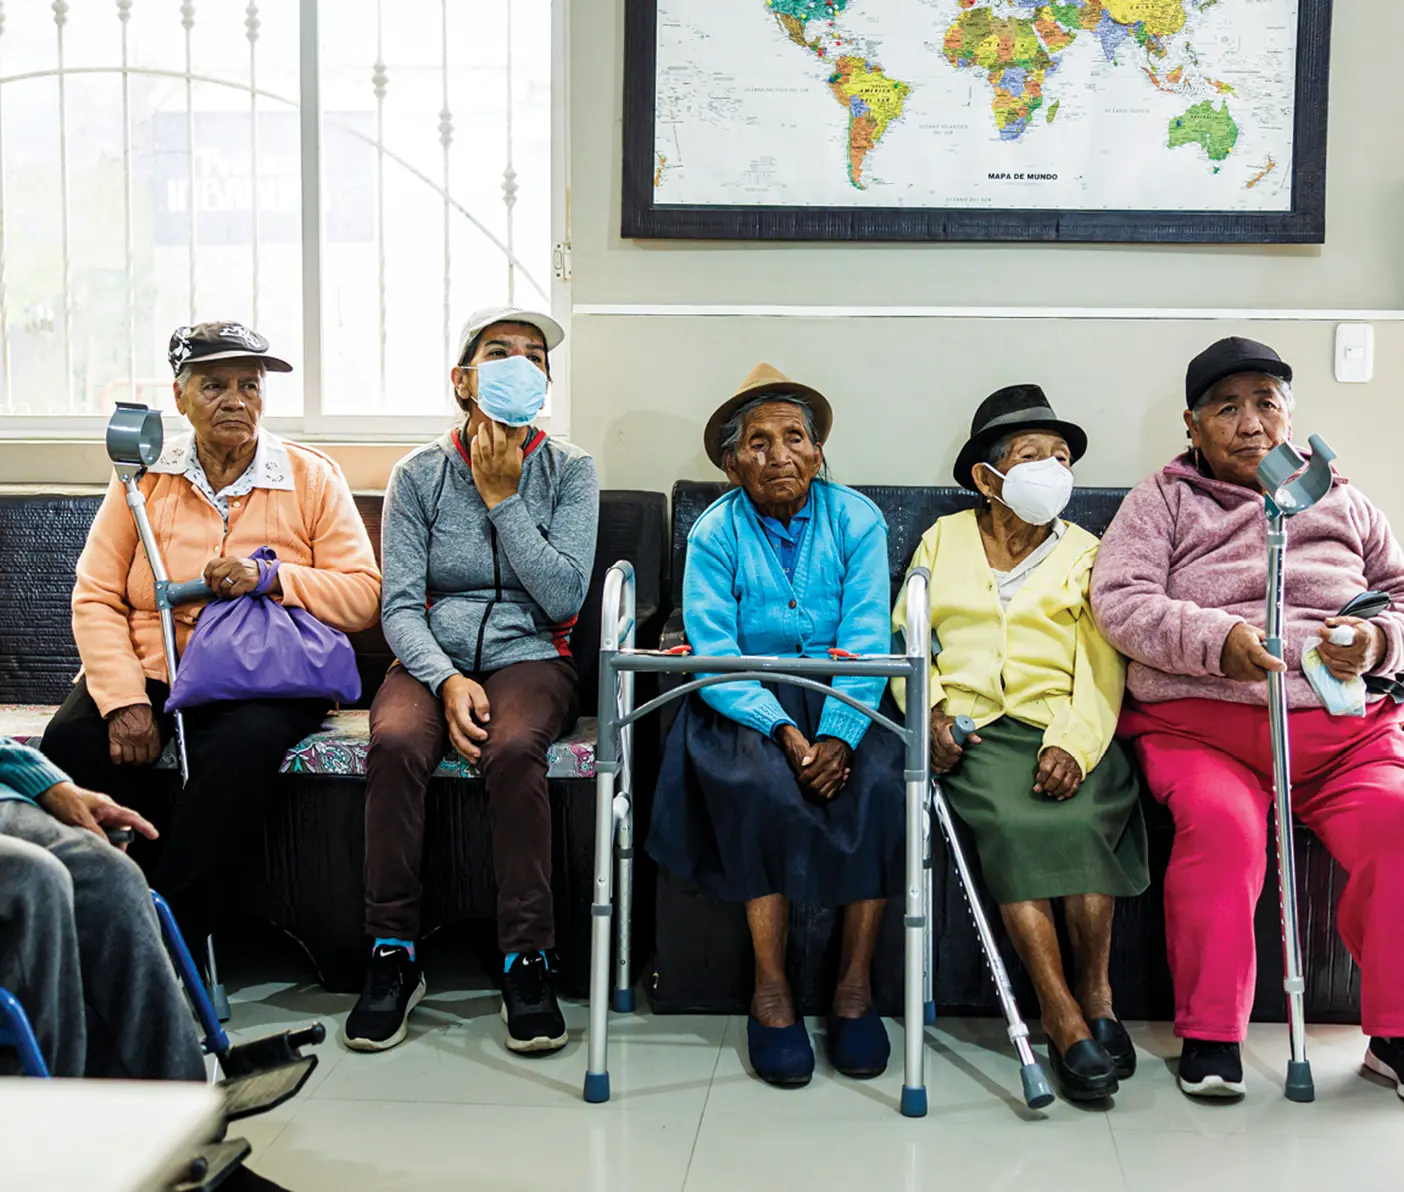 Elderly patients await their appointments for medical equipment checks and therapy at a clinic in Ibarra, Ecuador.